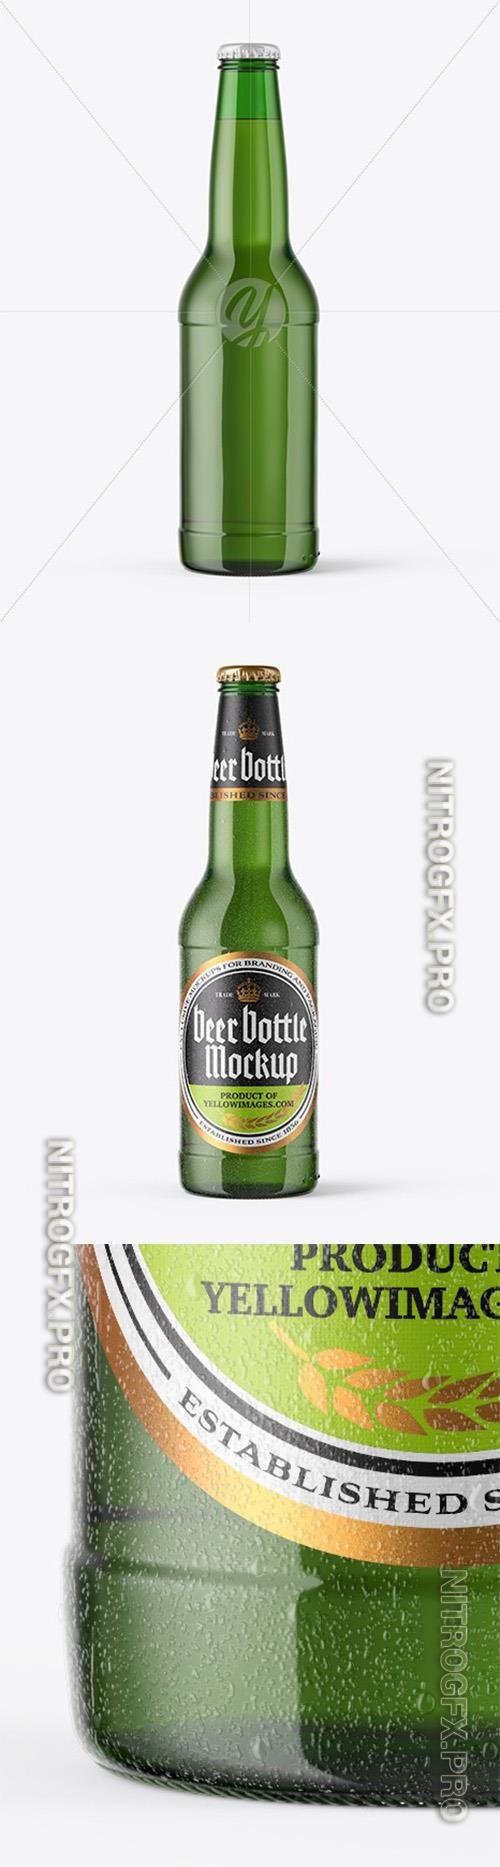 Green Glass Beer Bottle With Condensation Mockup 46283